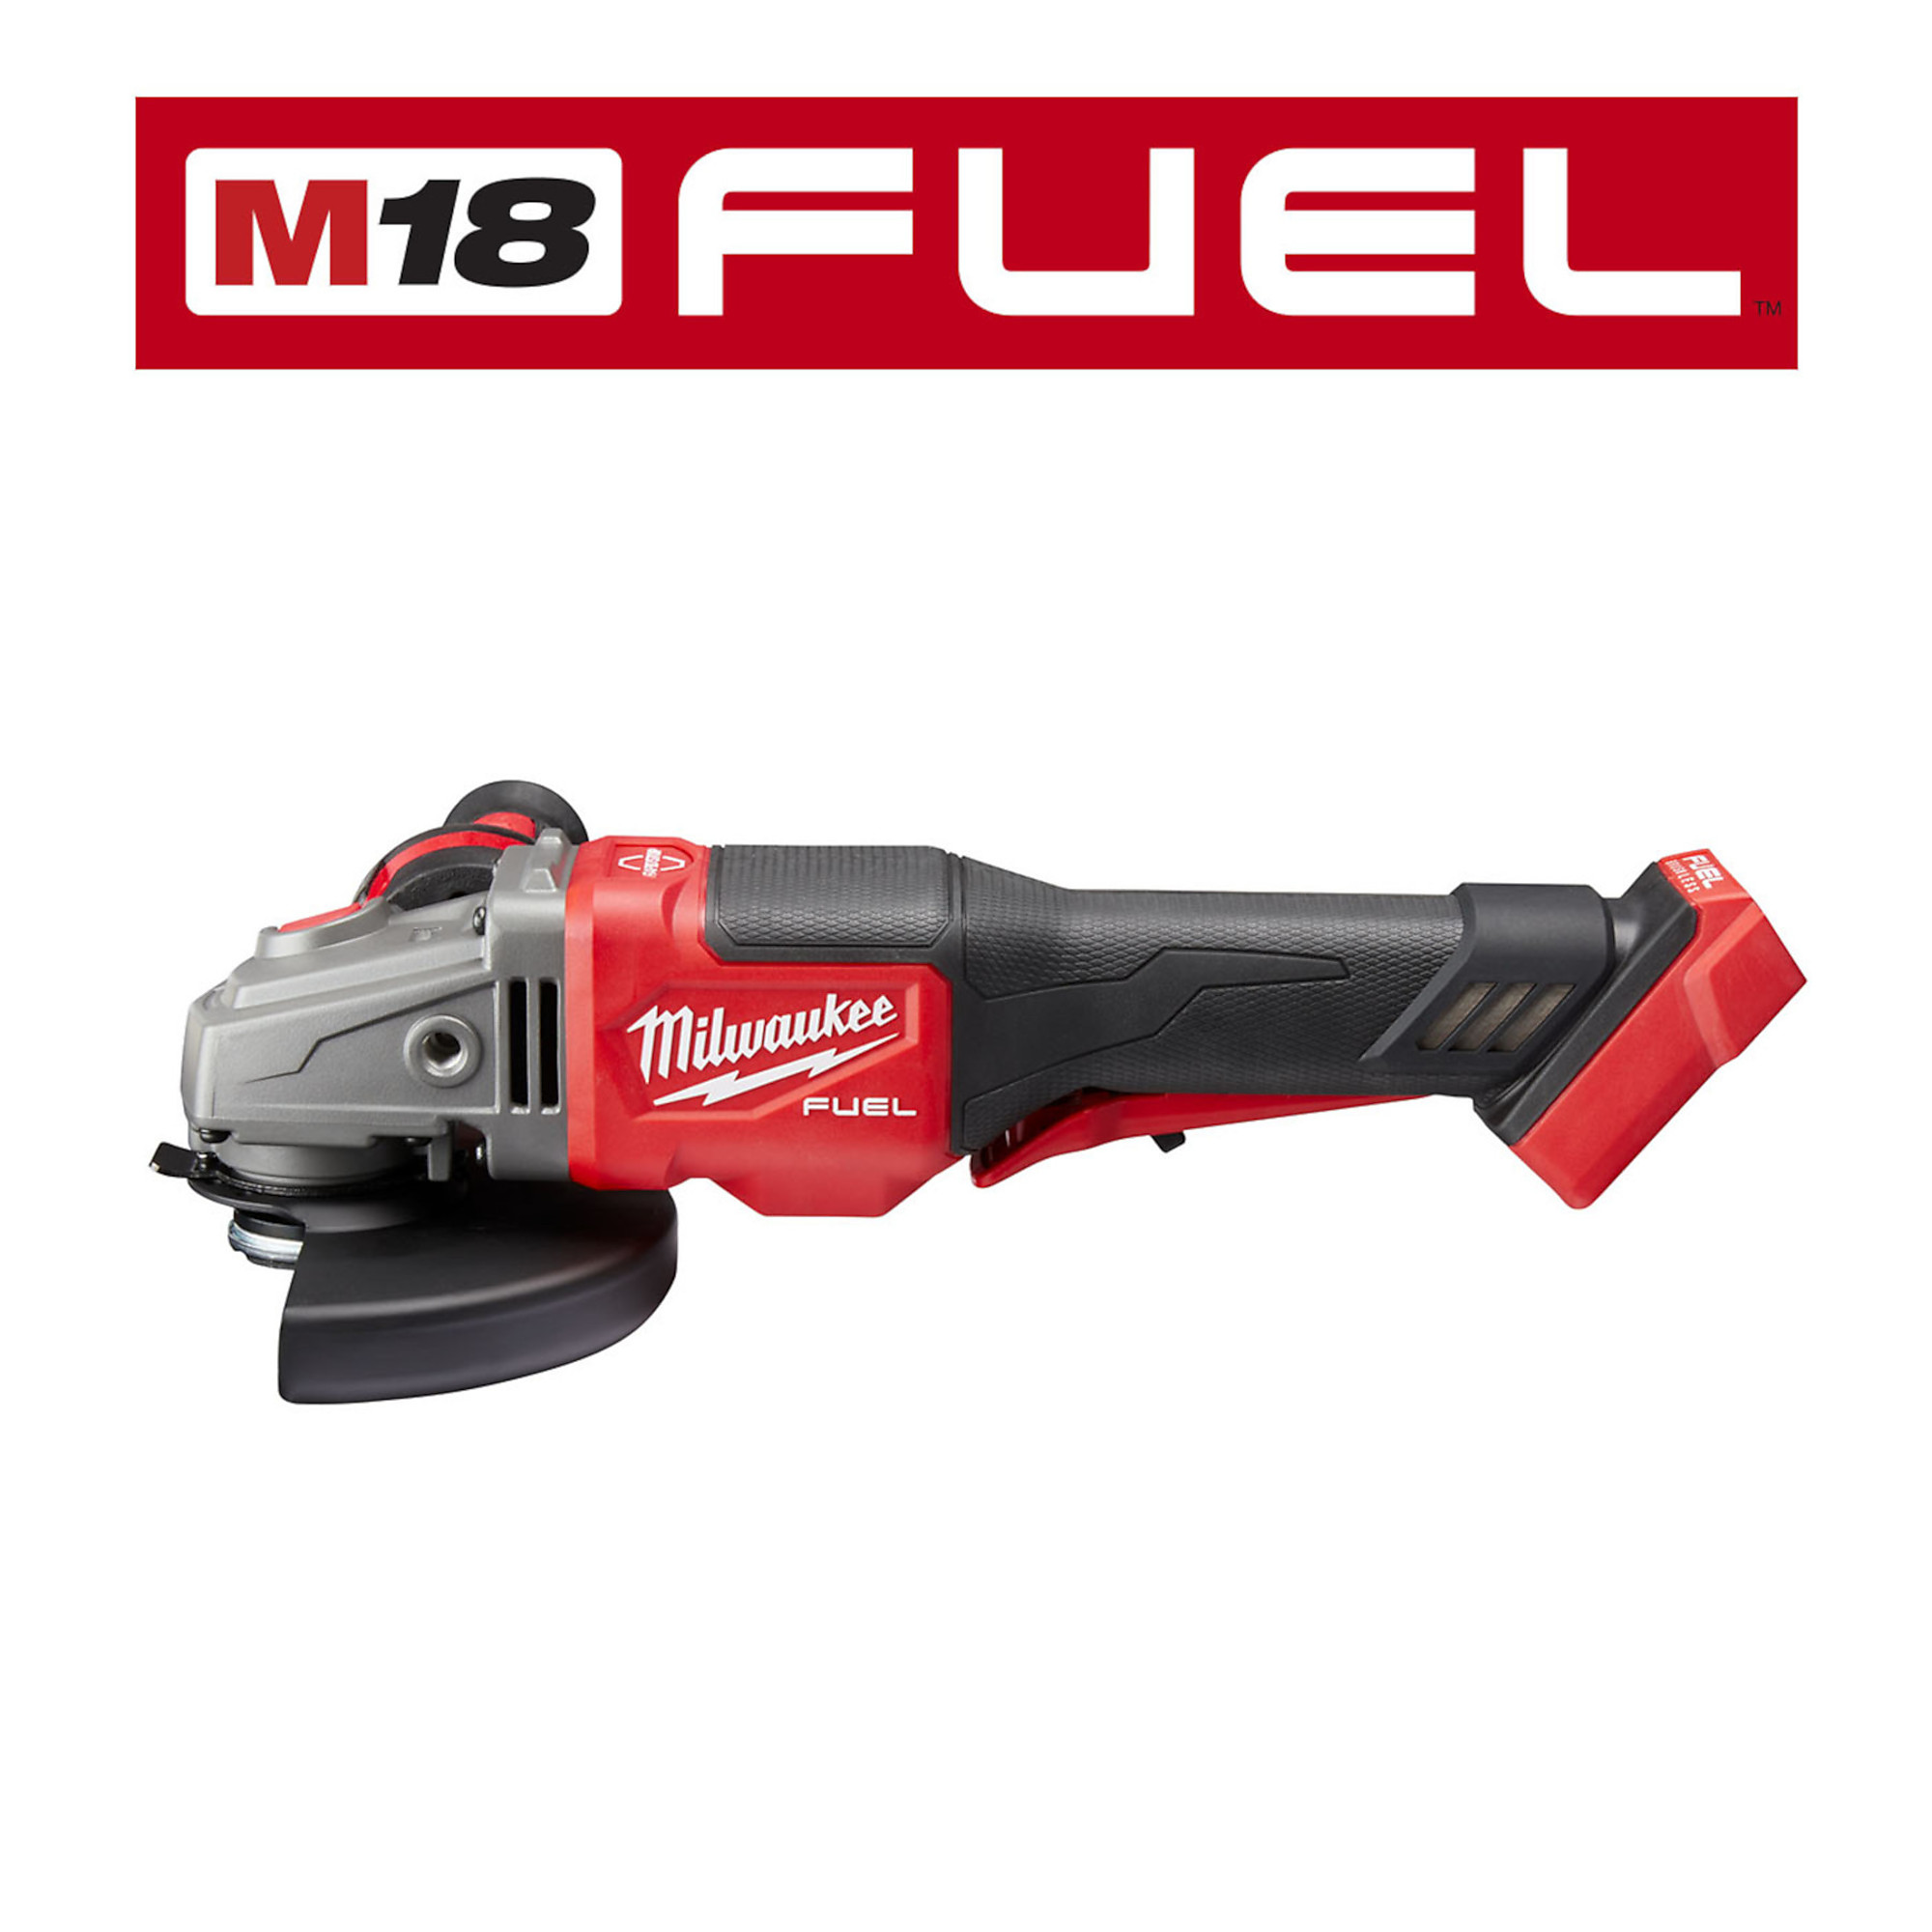 Milwaukee M18 FUEL Cordless 4 1/2Inch - 6Inch Braking Grinder, Tool Only, Paddle Switch, No-Lock, Model 2980-20